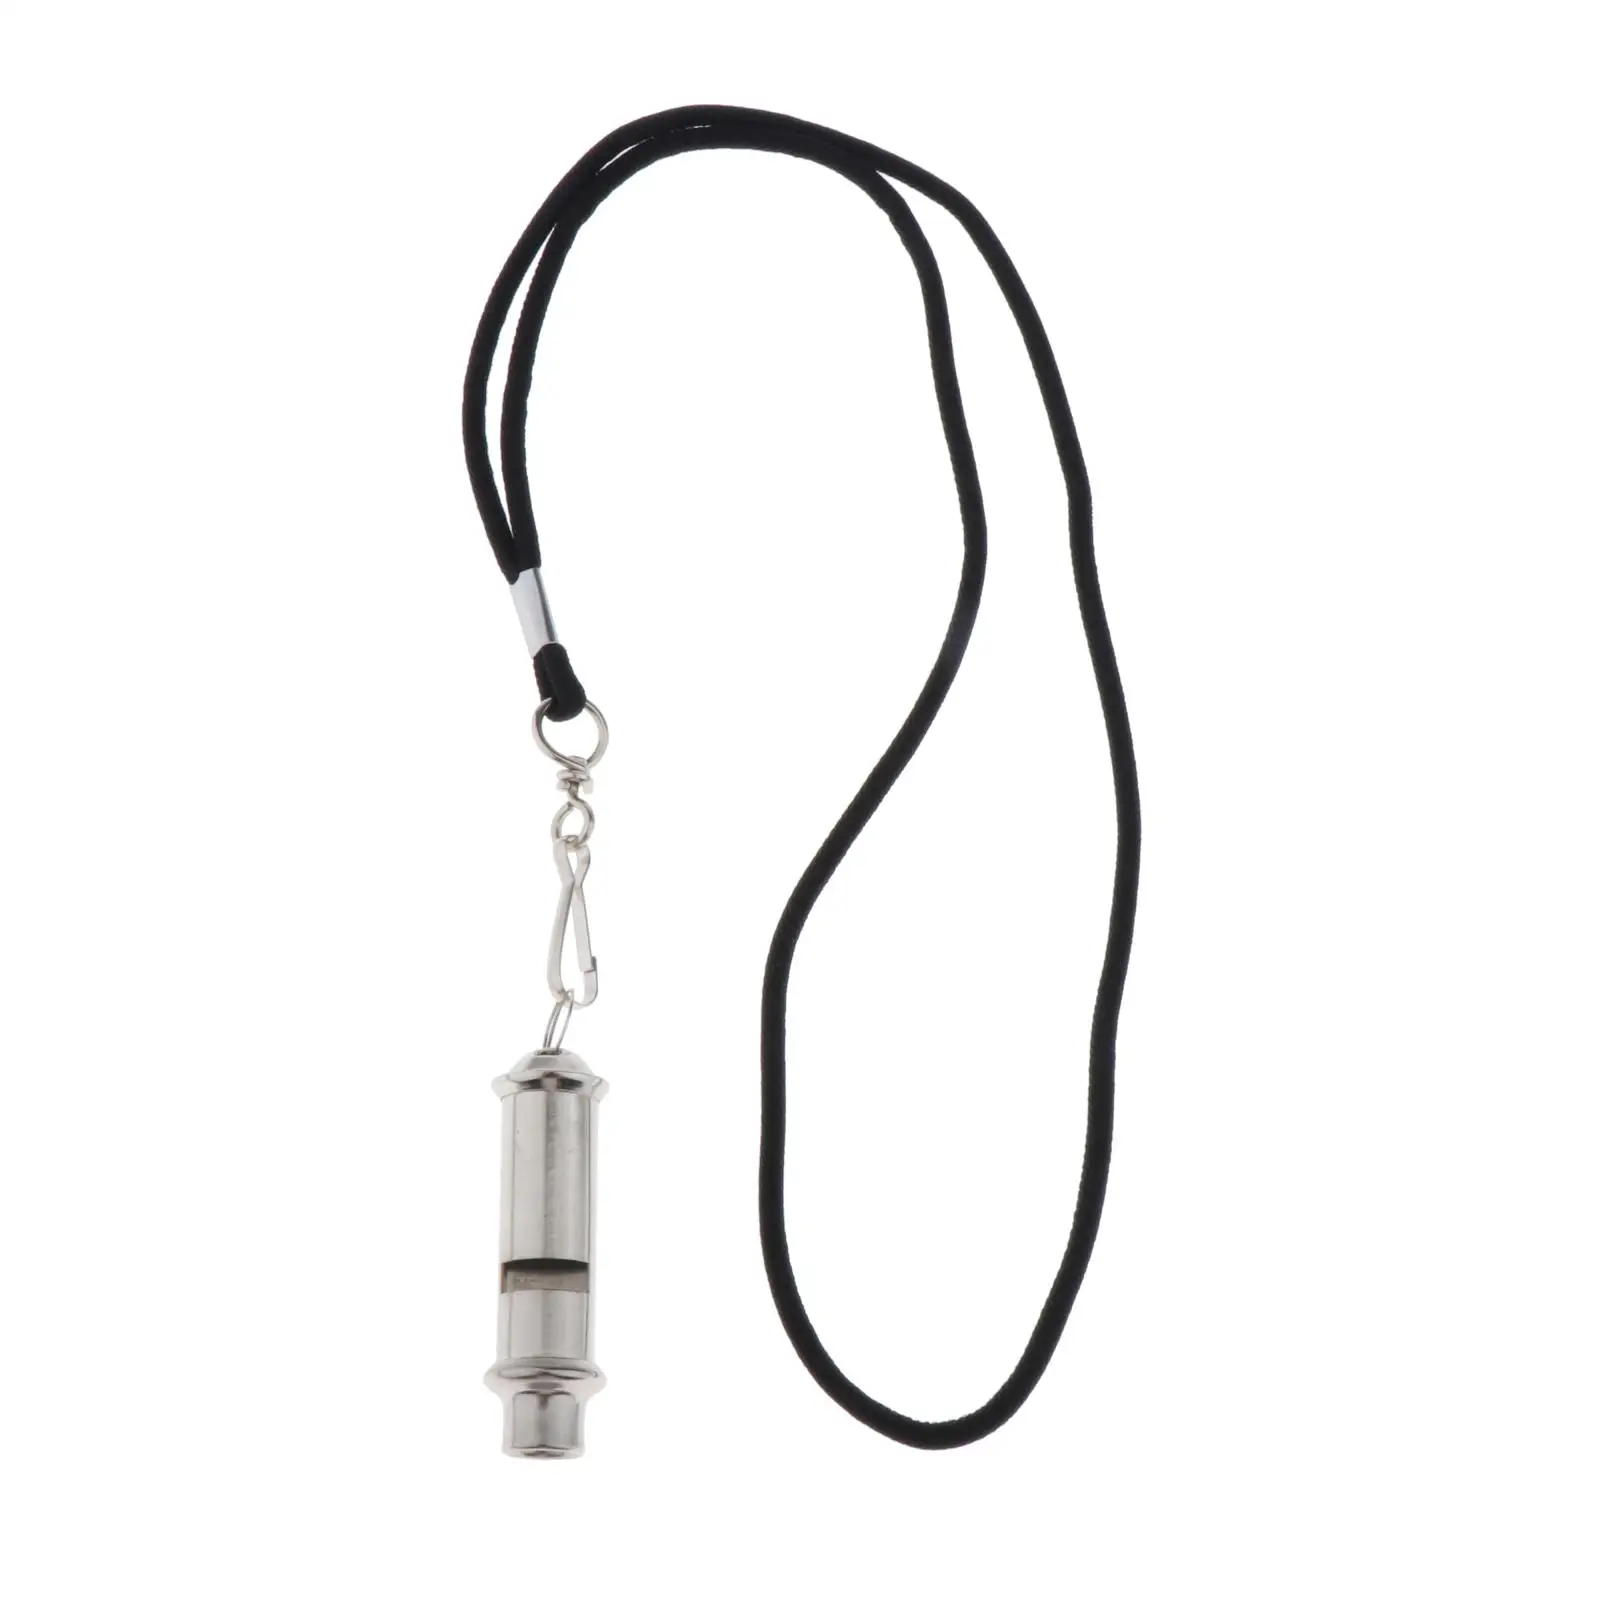 Metal Referee Whistle Emergency Survival Hiking Camping Whistle with Neck String